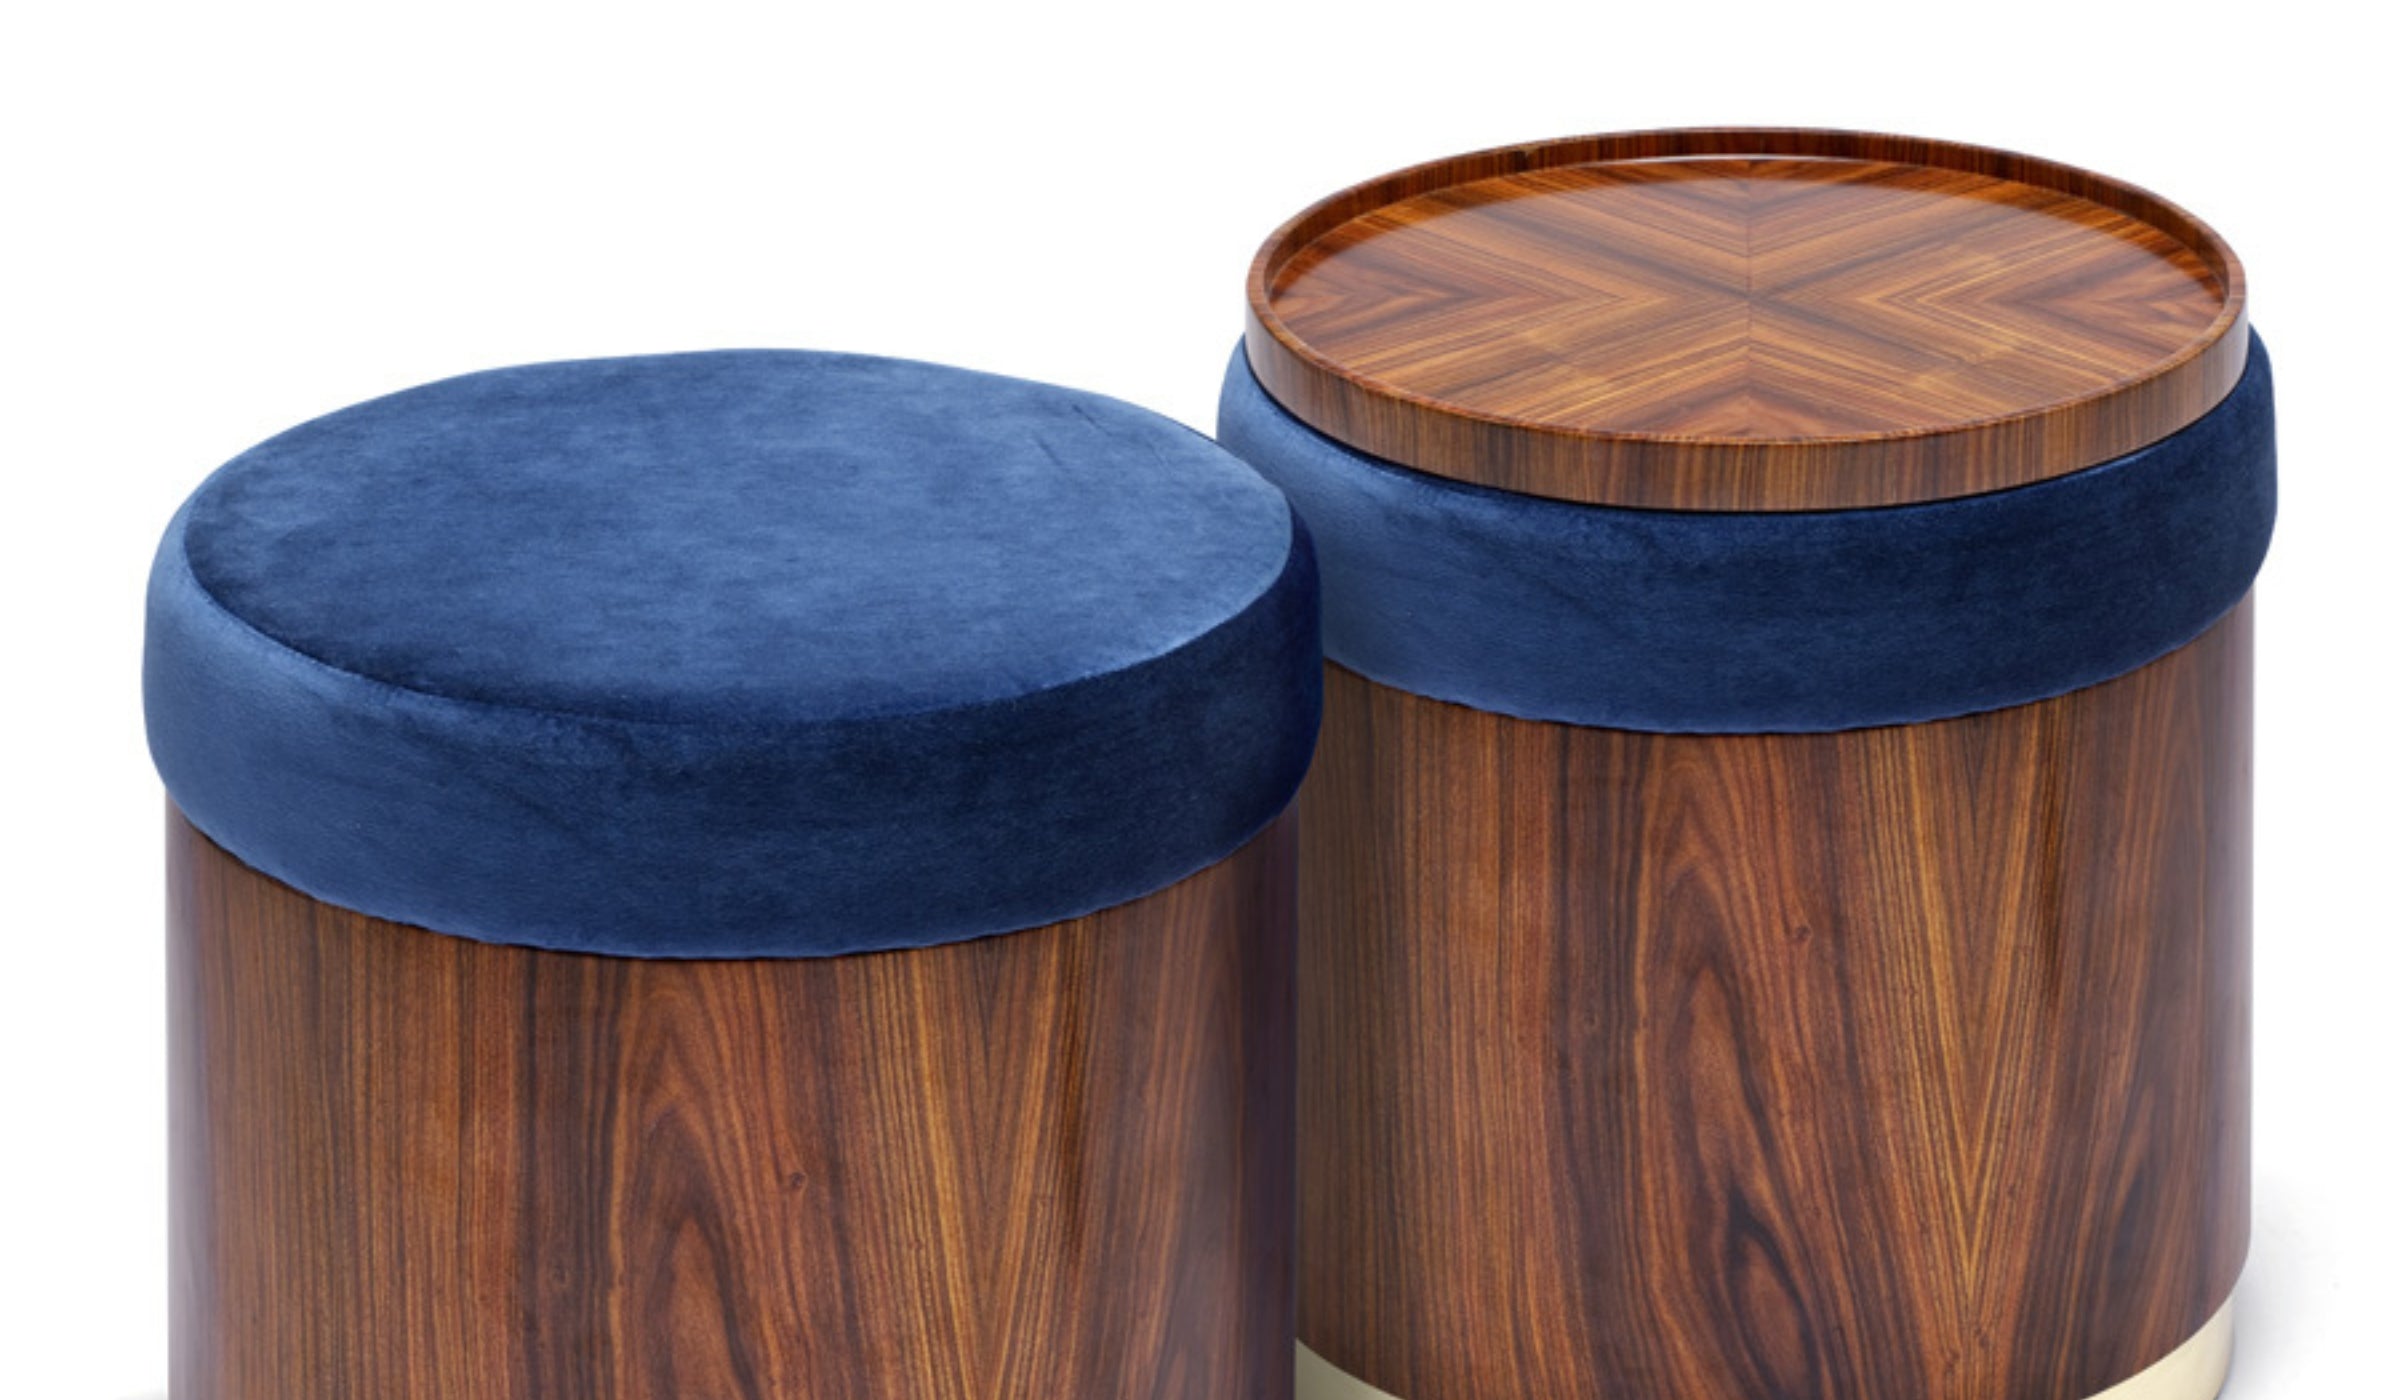 Lune A - Pouf in blue velvet, ironwood and polished brass